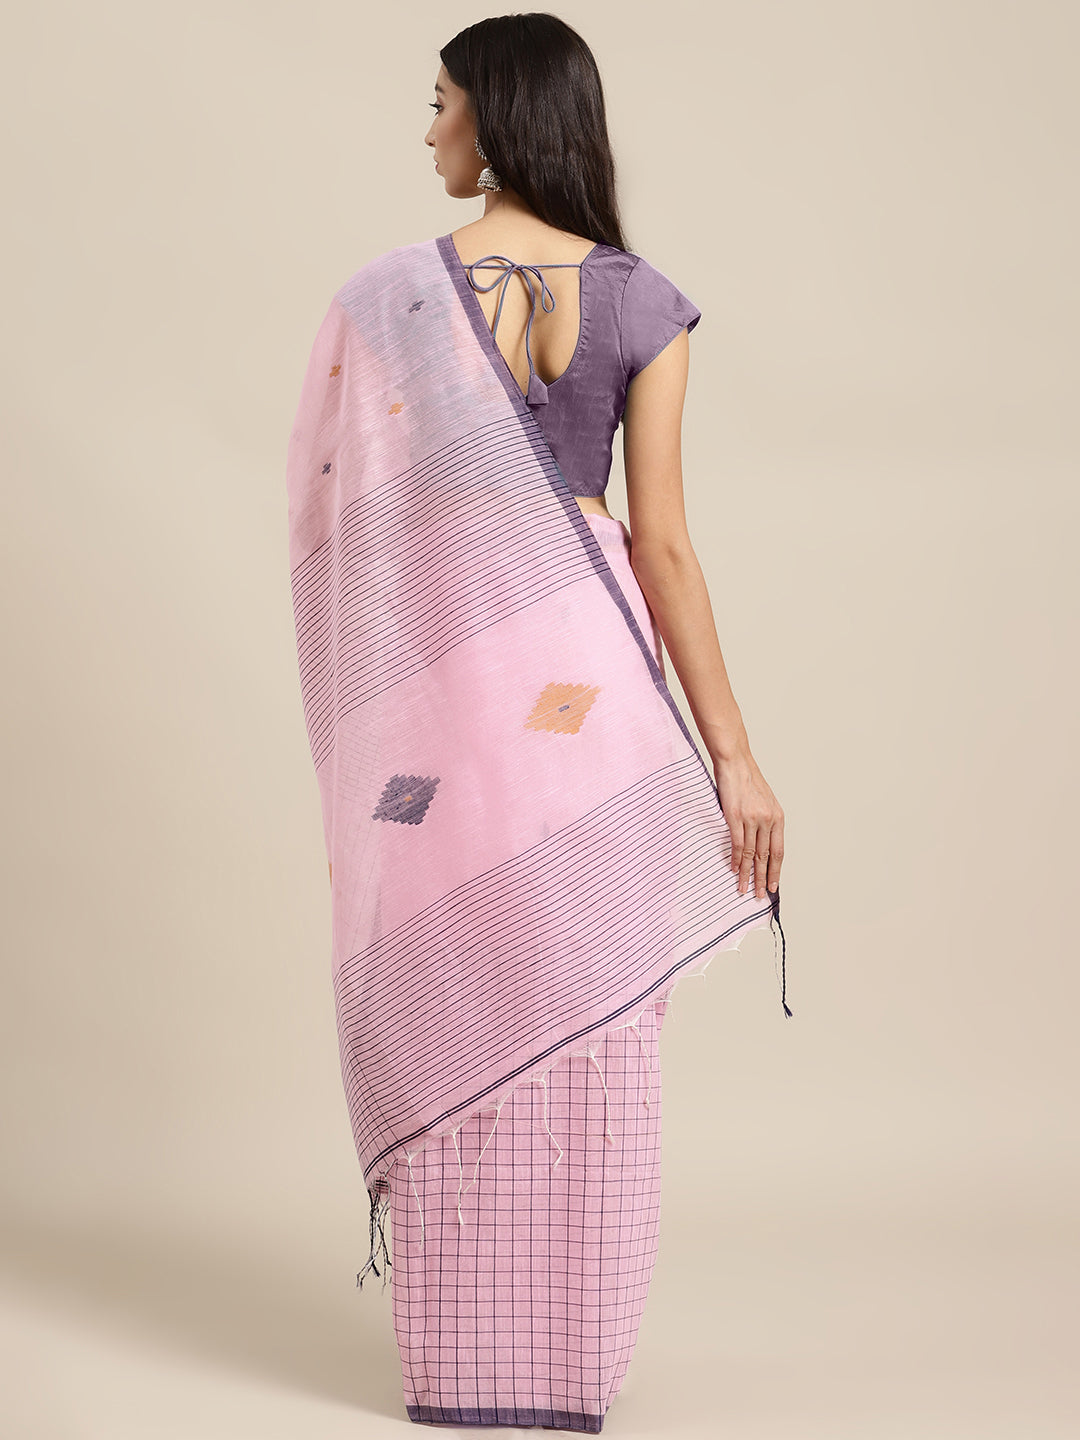 Pink and Blue, Kalakari India Ikat Silk Cotton Woven Design Saree with Blouse SHBESA0031-Saree-Kalakari India-SHBESA0031-Bengal, Cotton, Geographical Indication, Hand Crafted, Heritage Prints, Ikkat, Natural Dyes, Red, Sarees, Sustainable Fabrics, Woven, Yellow-[Linen,Ethnic,wear,Fashionista,Handloom,Handicraft,Indigo,blockprint,block,print,Cotton,Chanderi,Blue, latest,classy,party,bollywood,trendy,summer,style,traditional,formal,elegant,unique,style,hand,block,print, dabu,booti,gift,present,gla